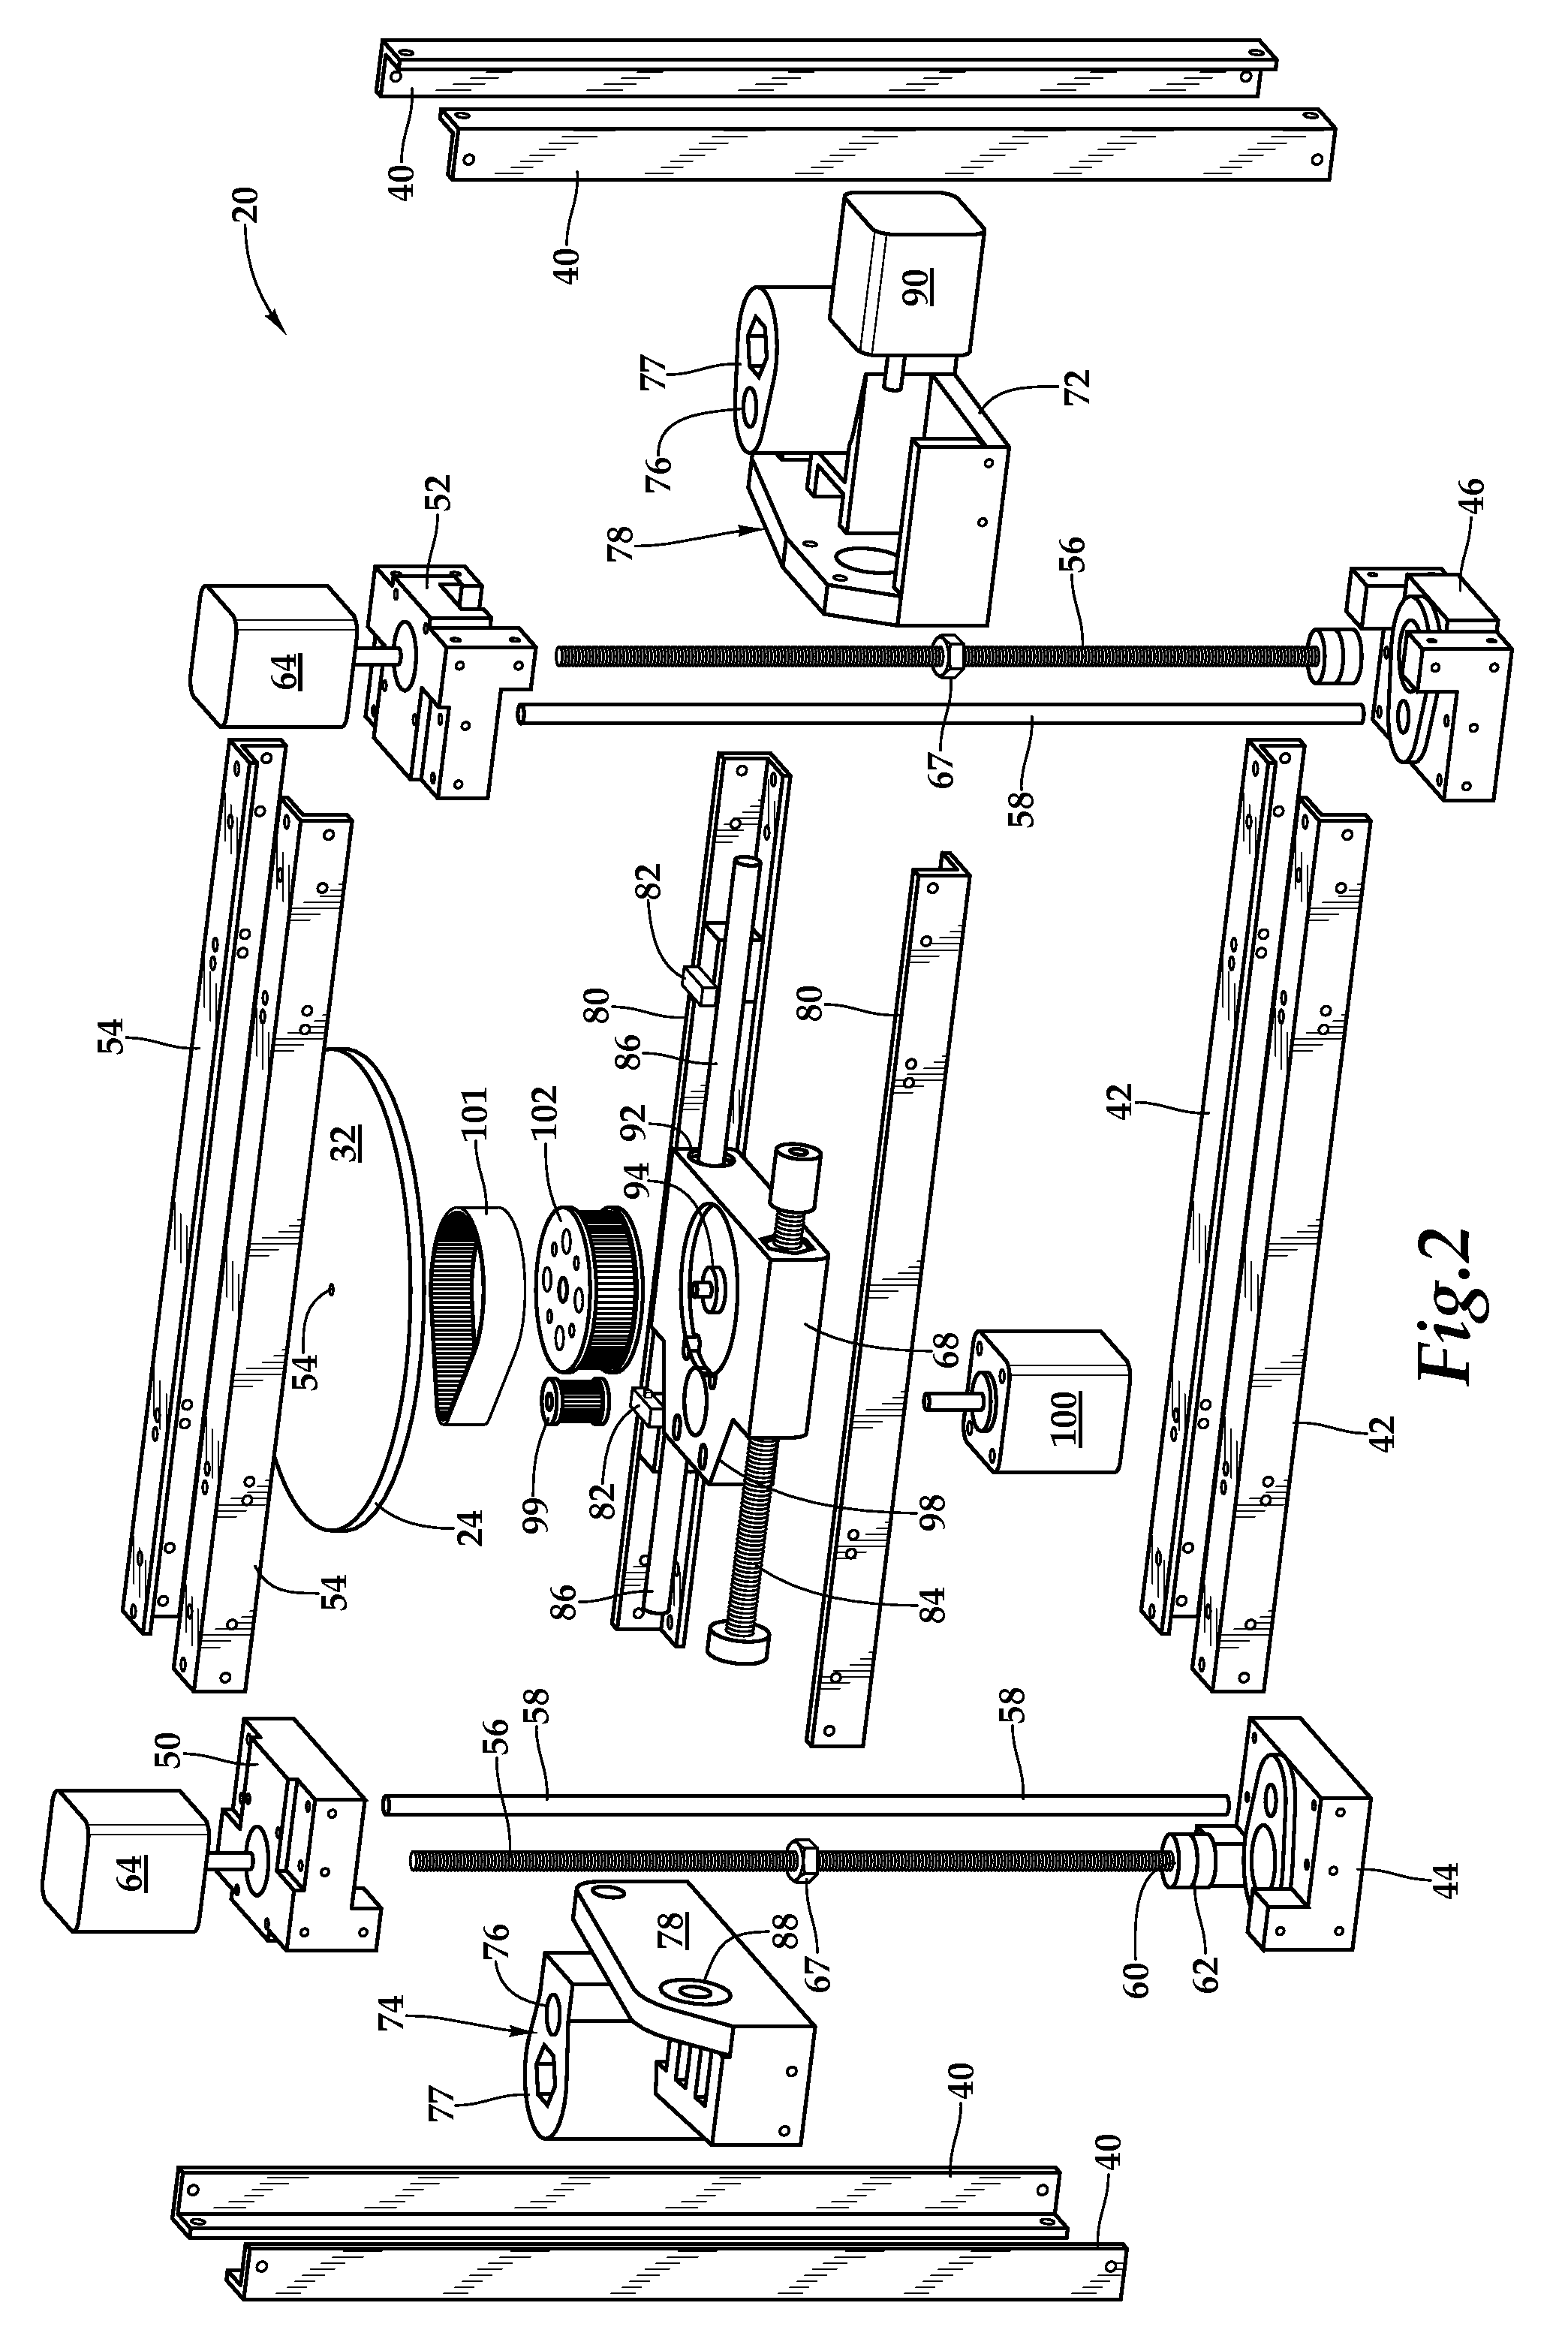 Fixed printhead fused filament fabrication printer and method